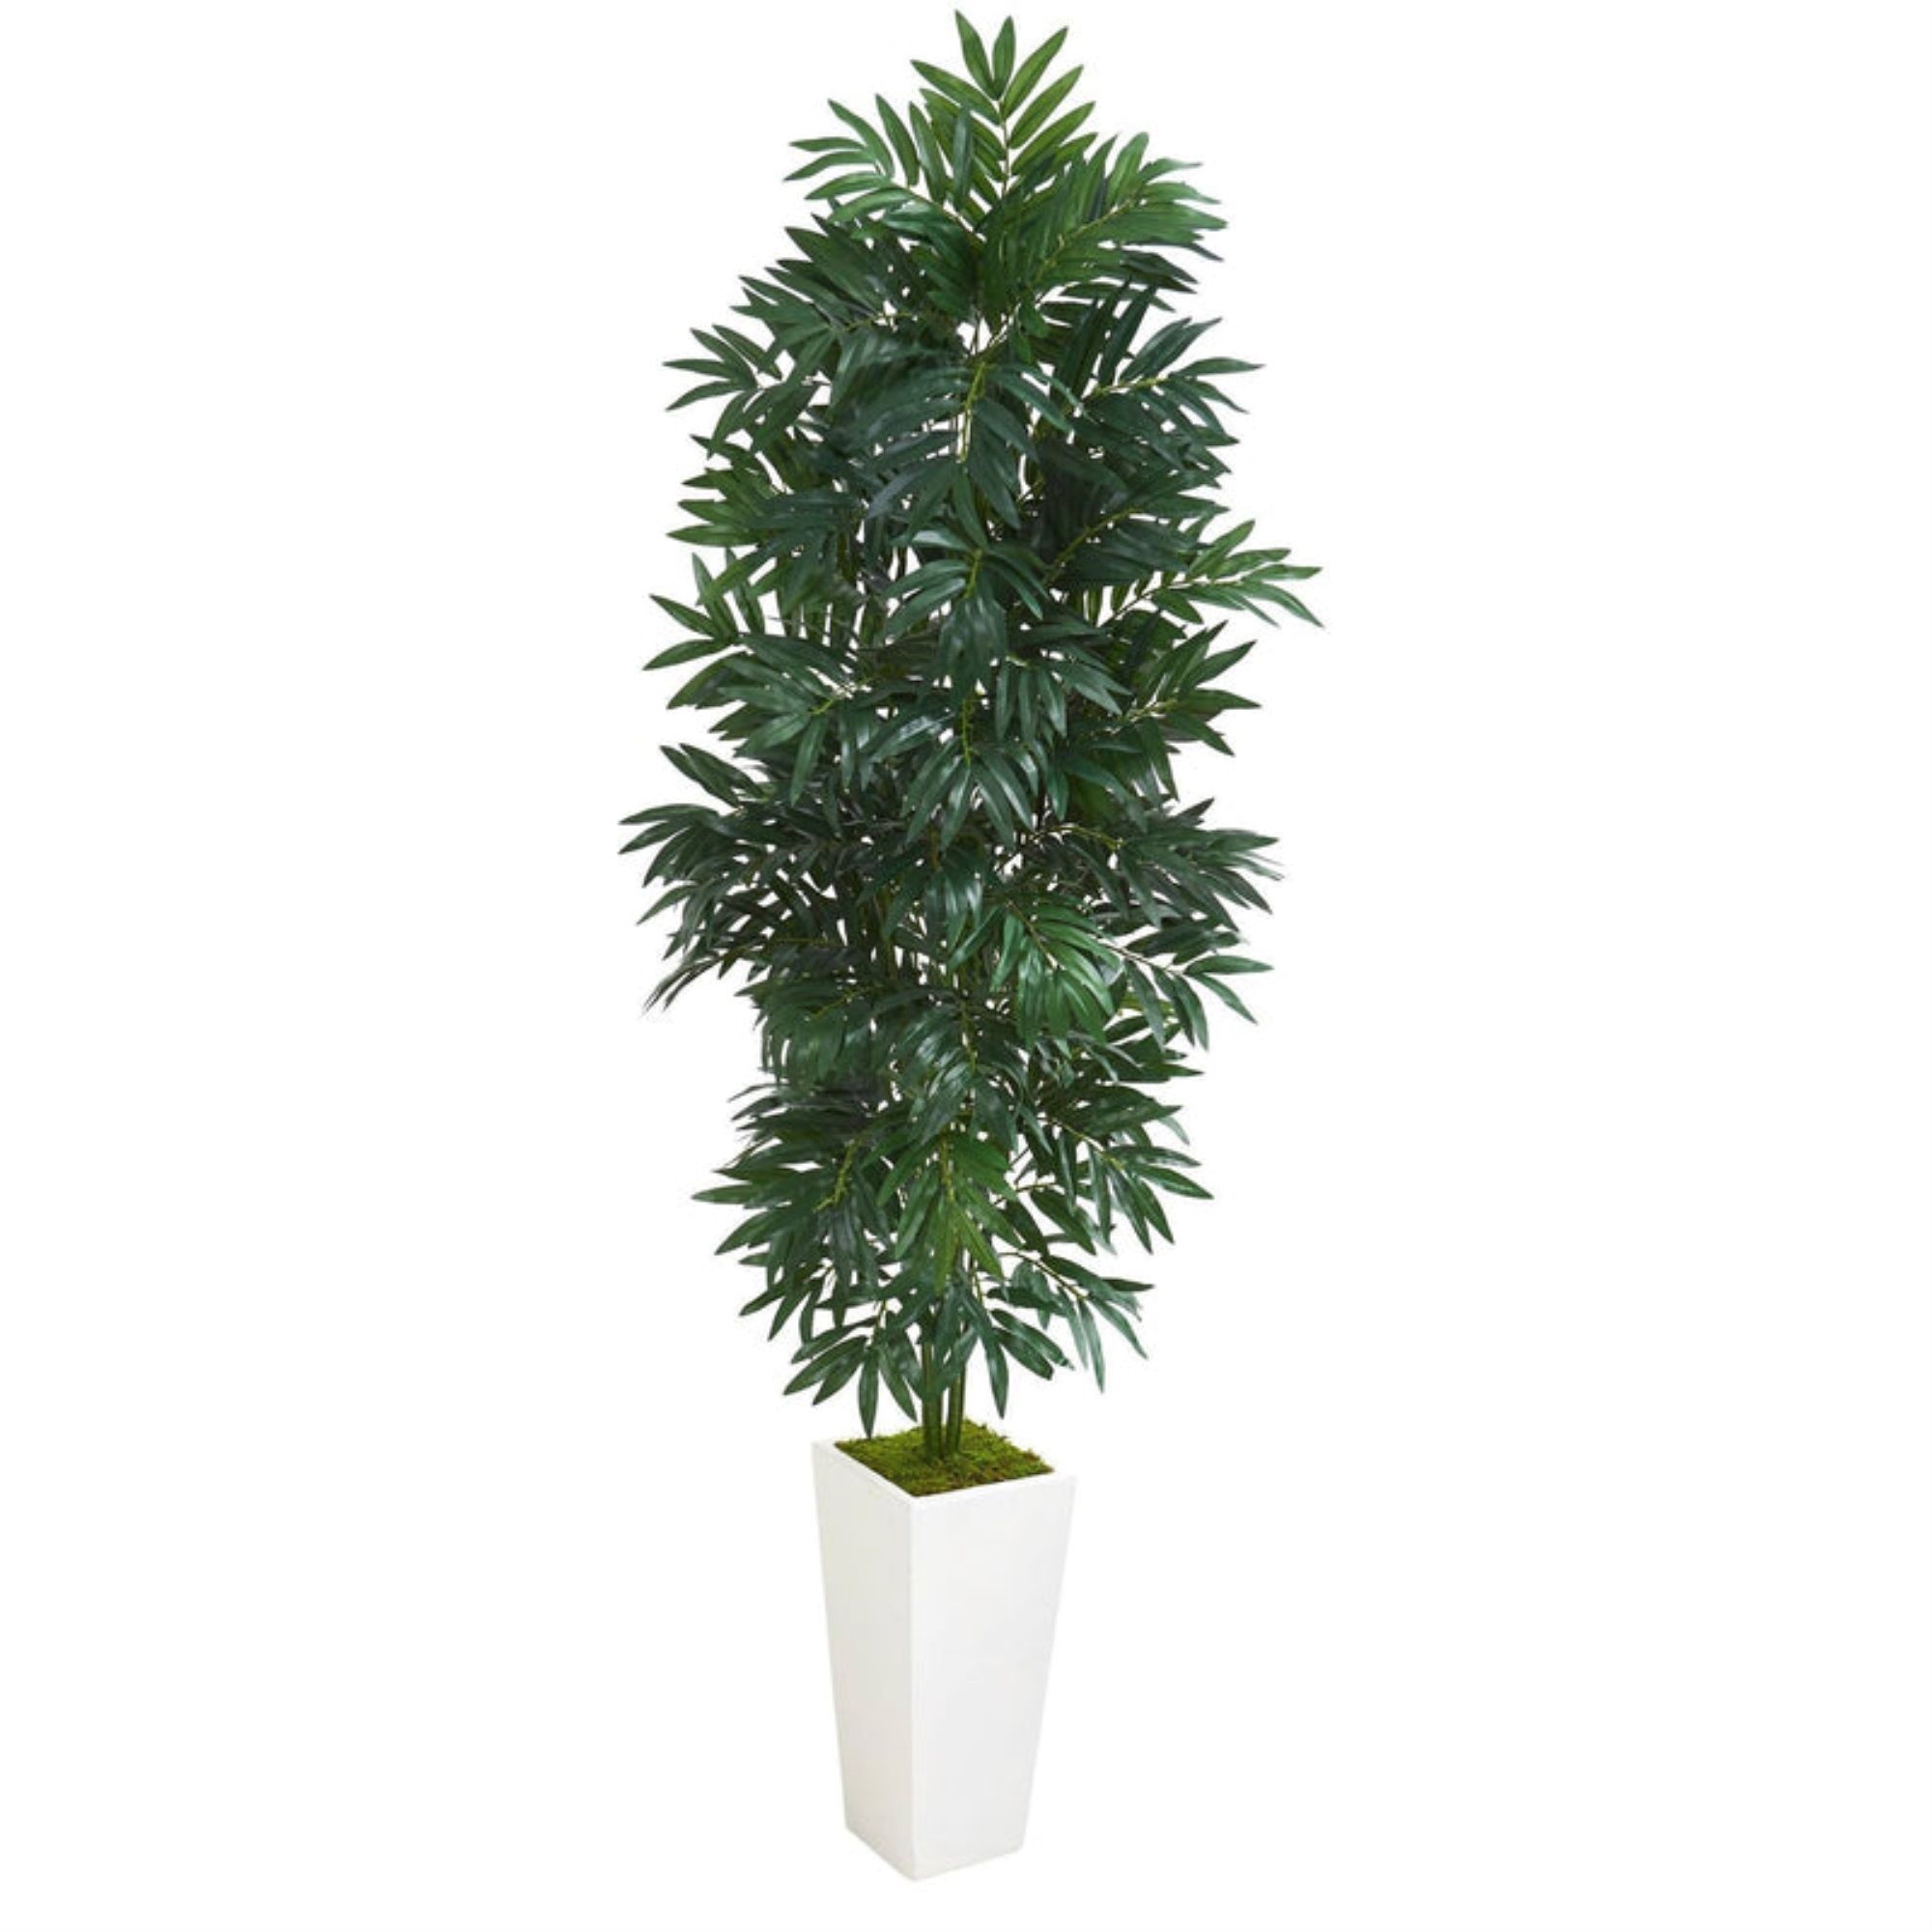 5' Bamboo Palm Artificial Plant in White Planter | Walmart (US)